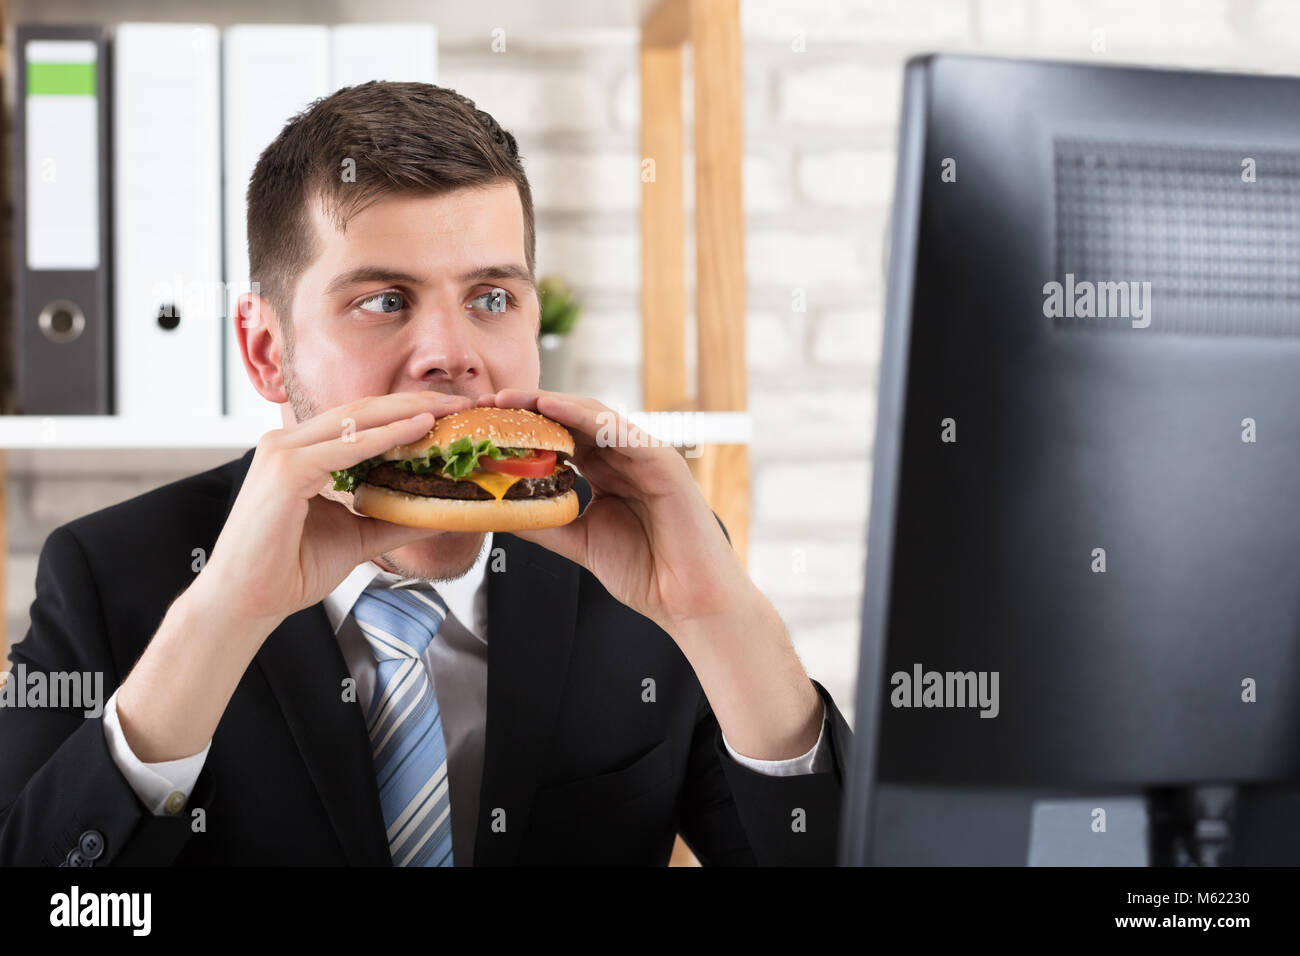 Portrait Of A Business Man Eating Burger While Looking At Computer In Office Stock Photo